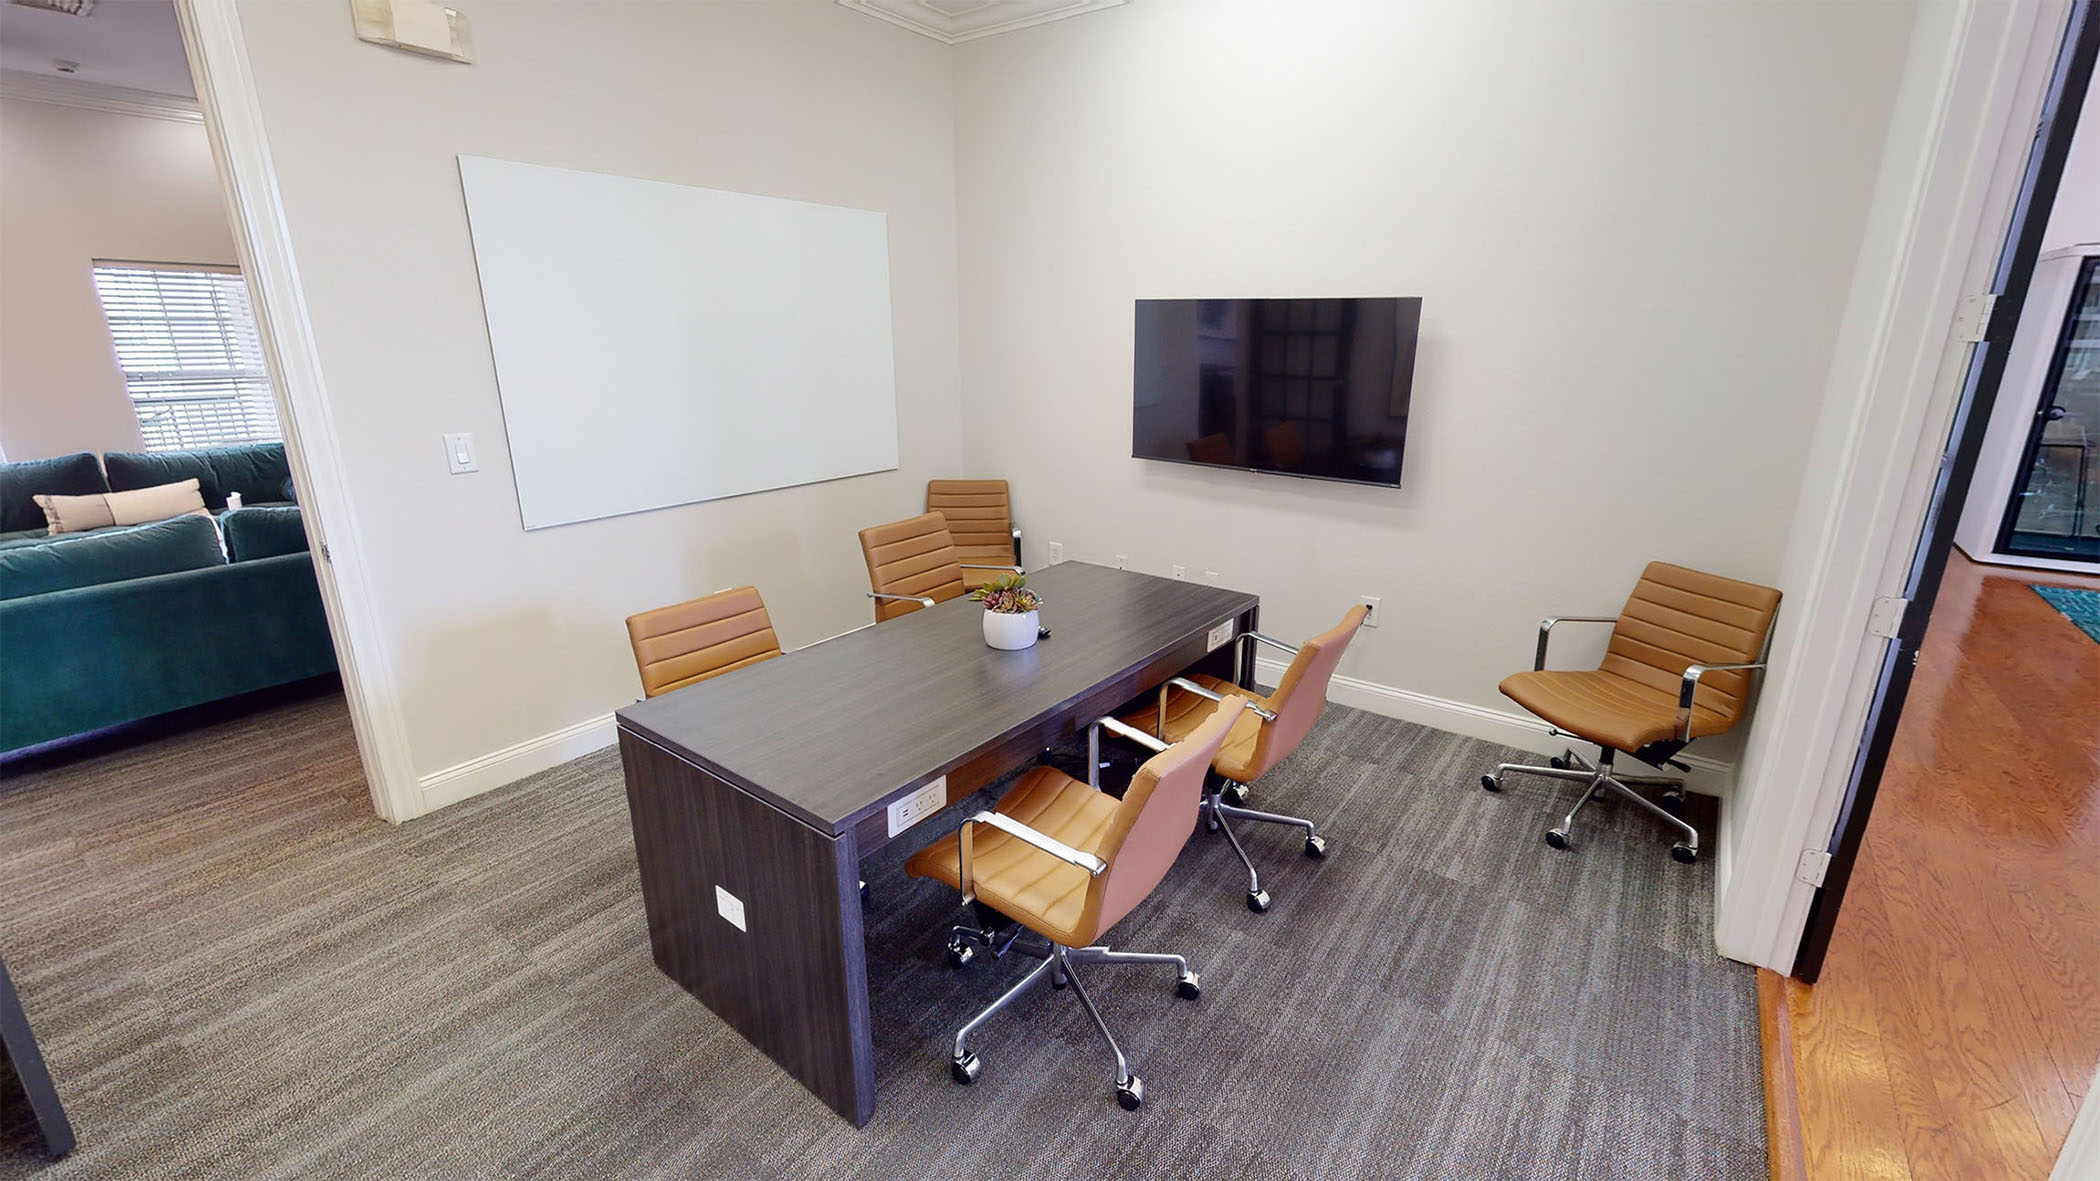 A conference room with a 4 person table and TV with HDMI hookup